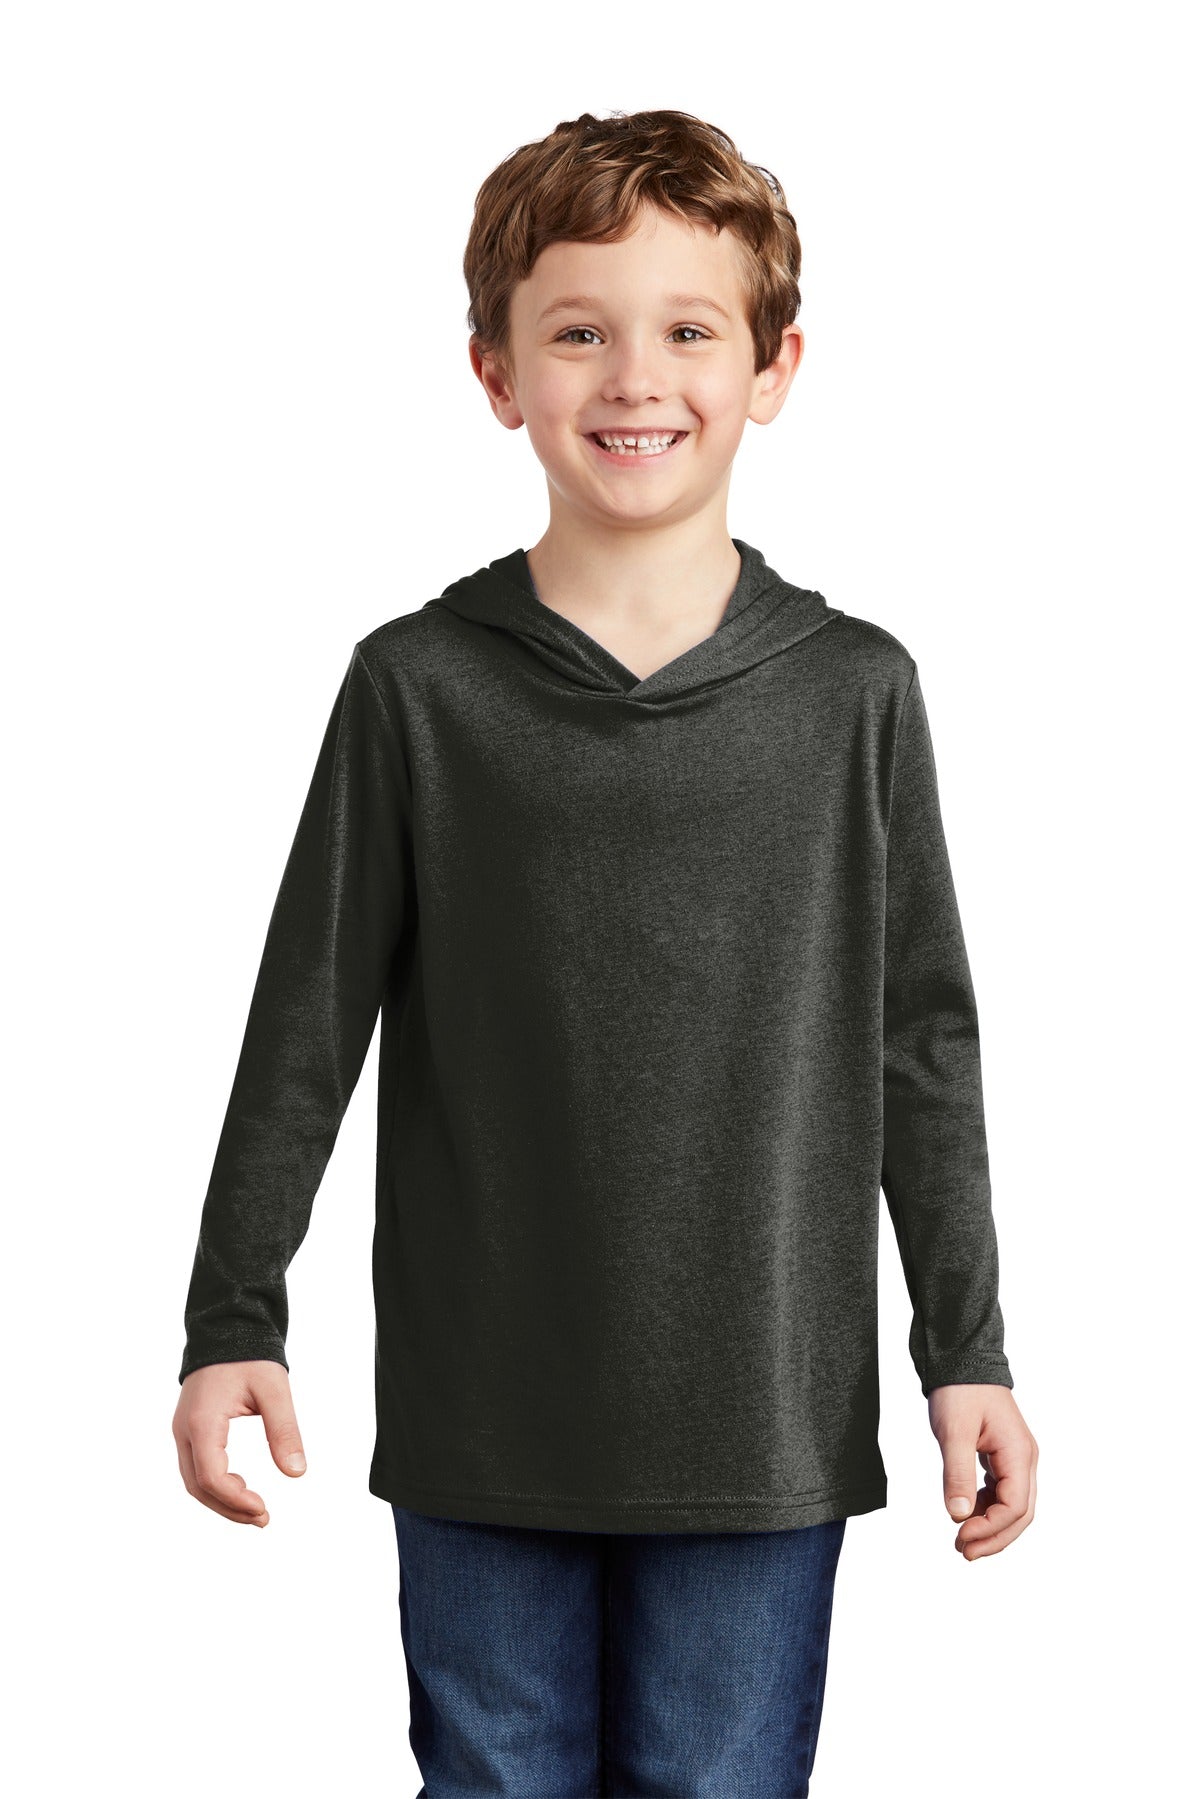 District ® Youth Perfect Tri ® Long Sleeve Hoodie DT139Y - DFW Impression